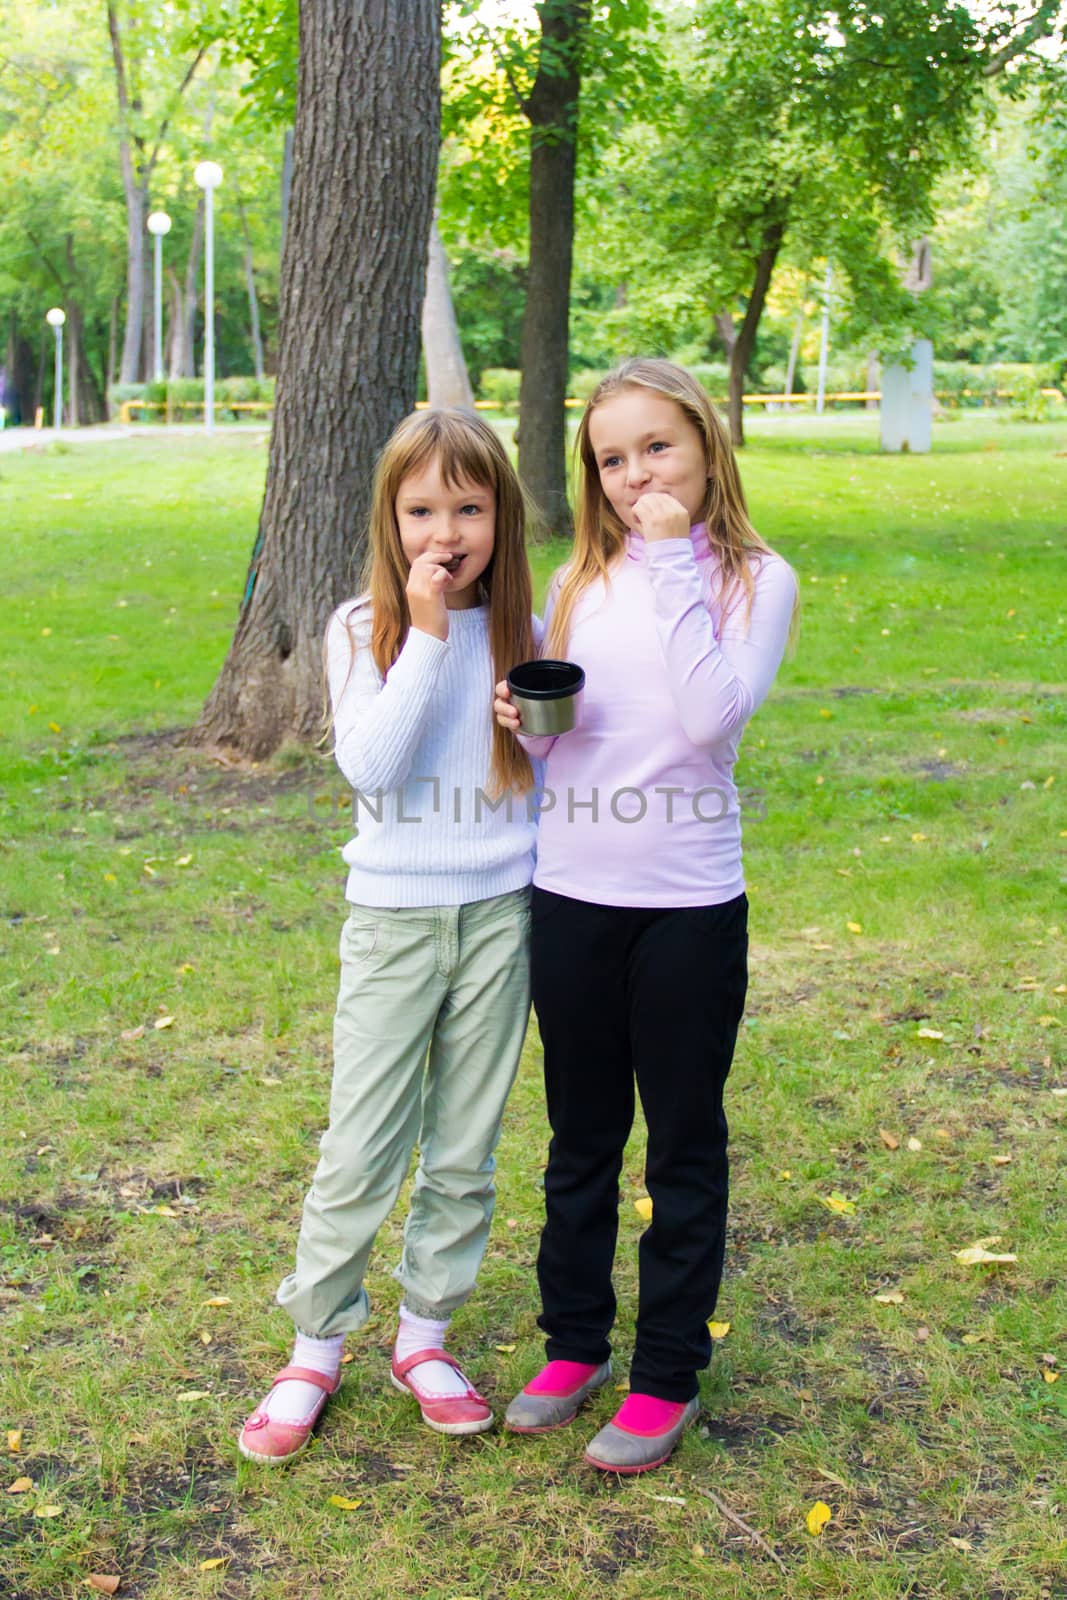 Photo of two eating girls in summer